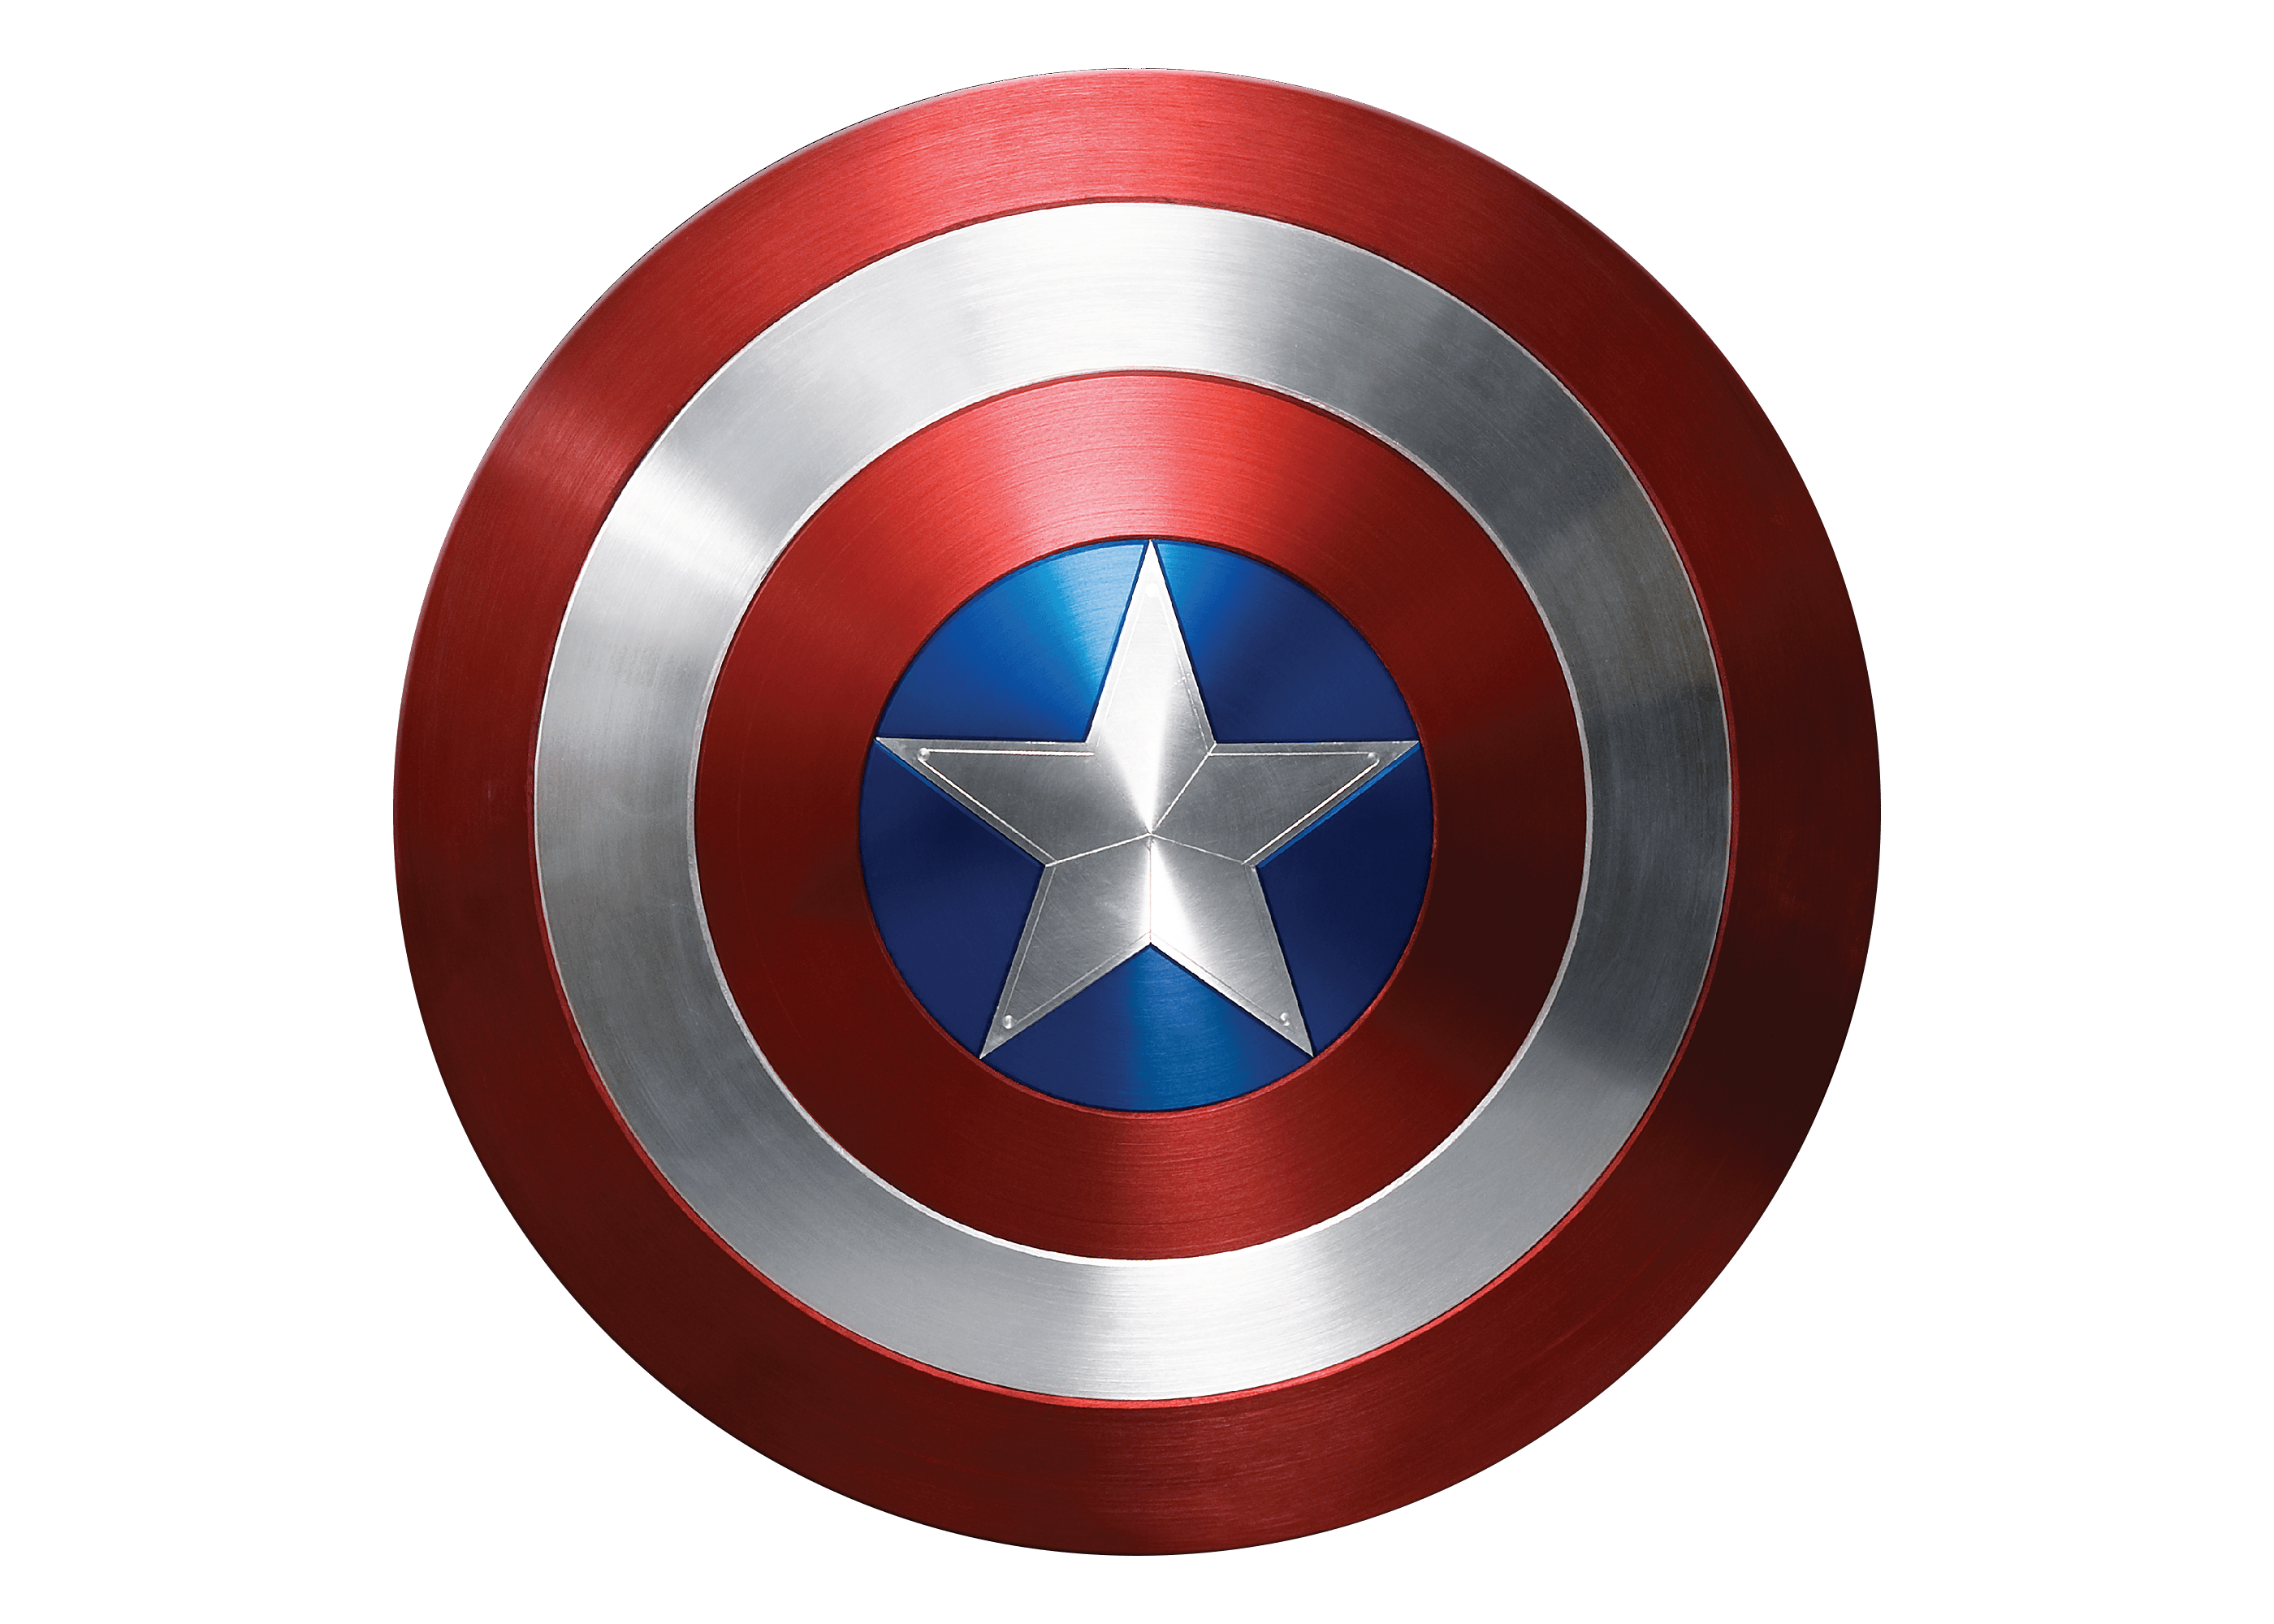 Captain America Logo - Captain America Logo, Captain America Symbol, Meaning, History